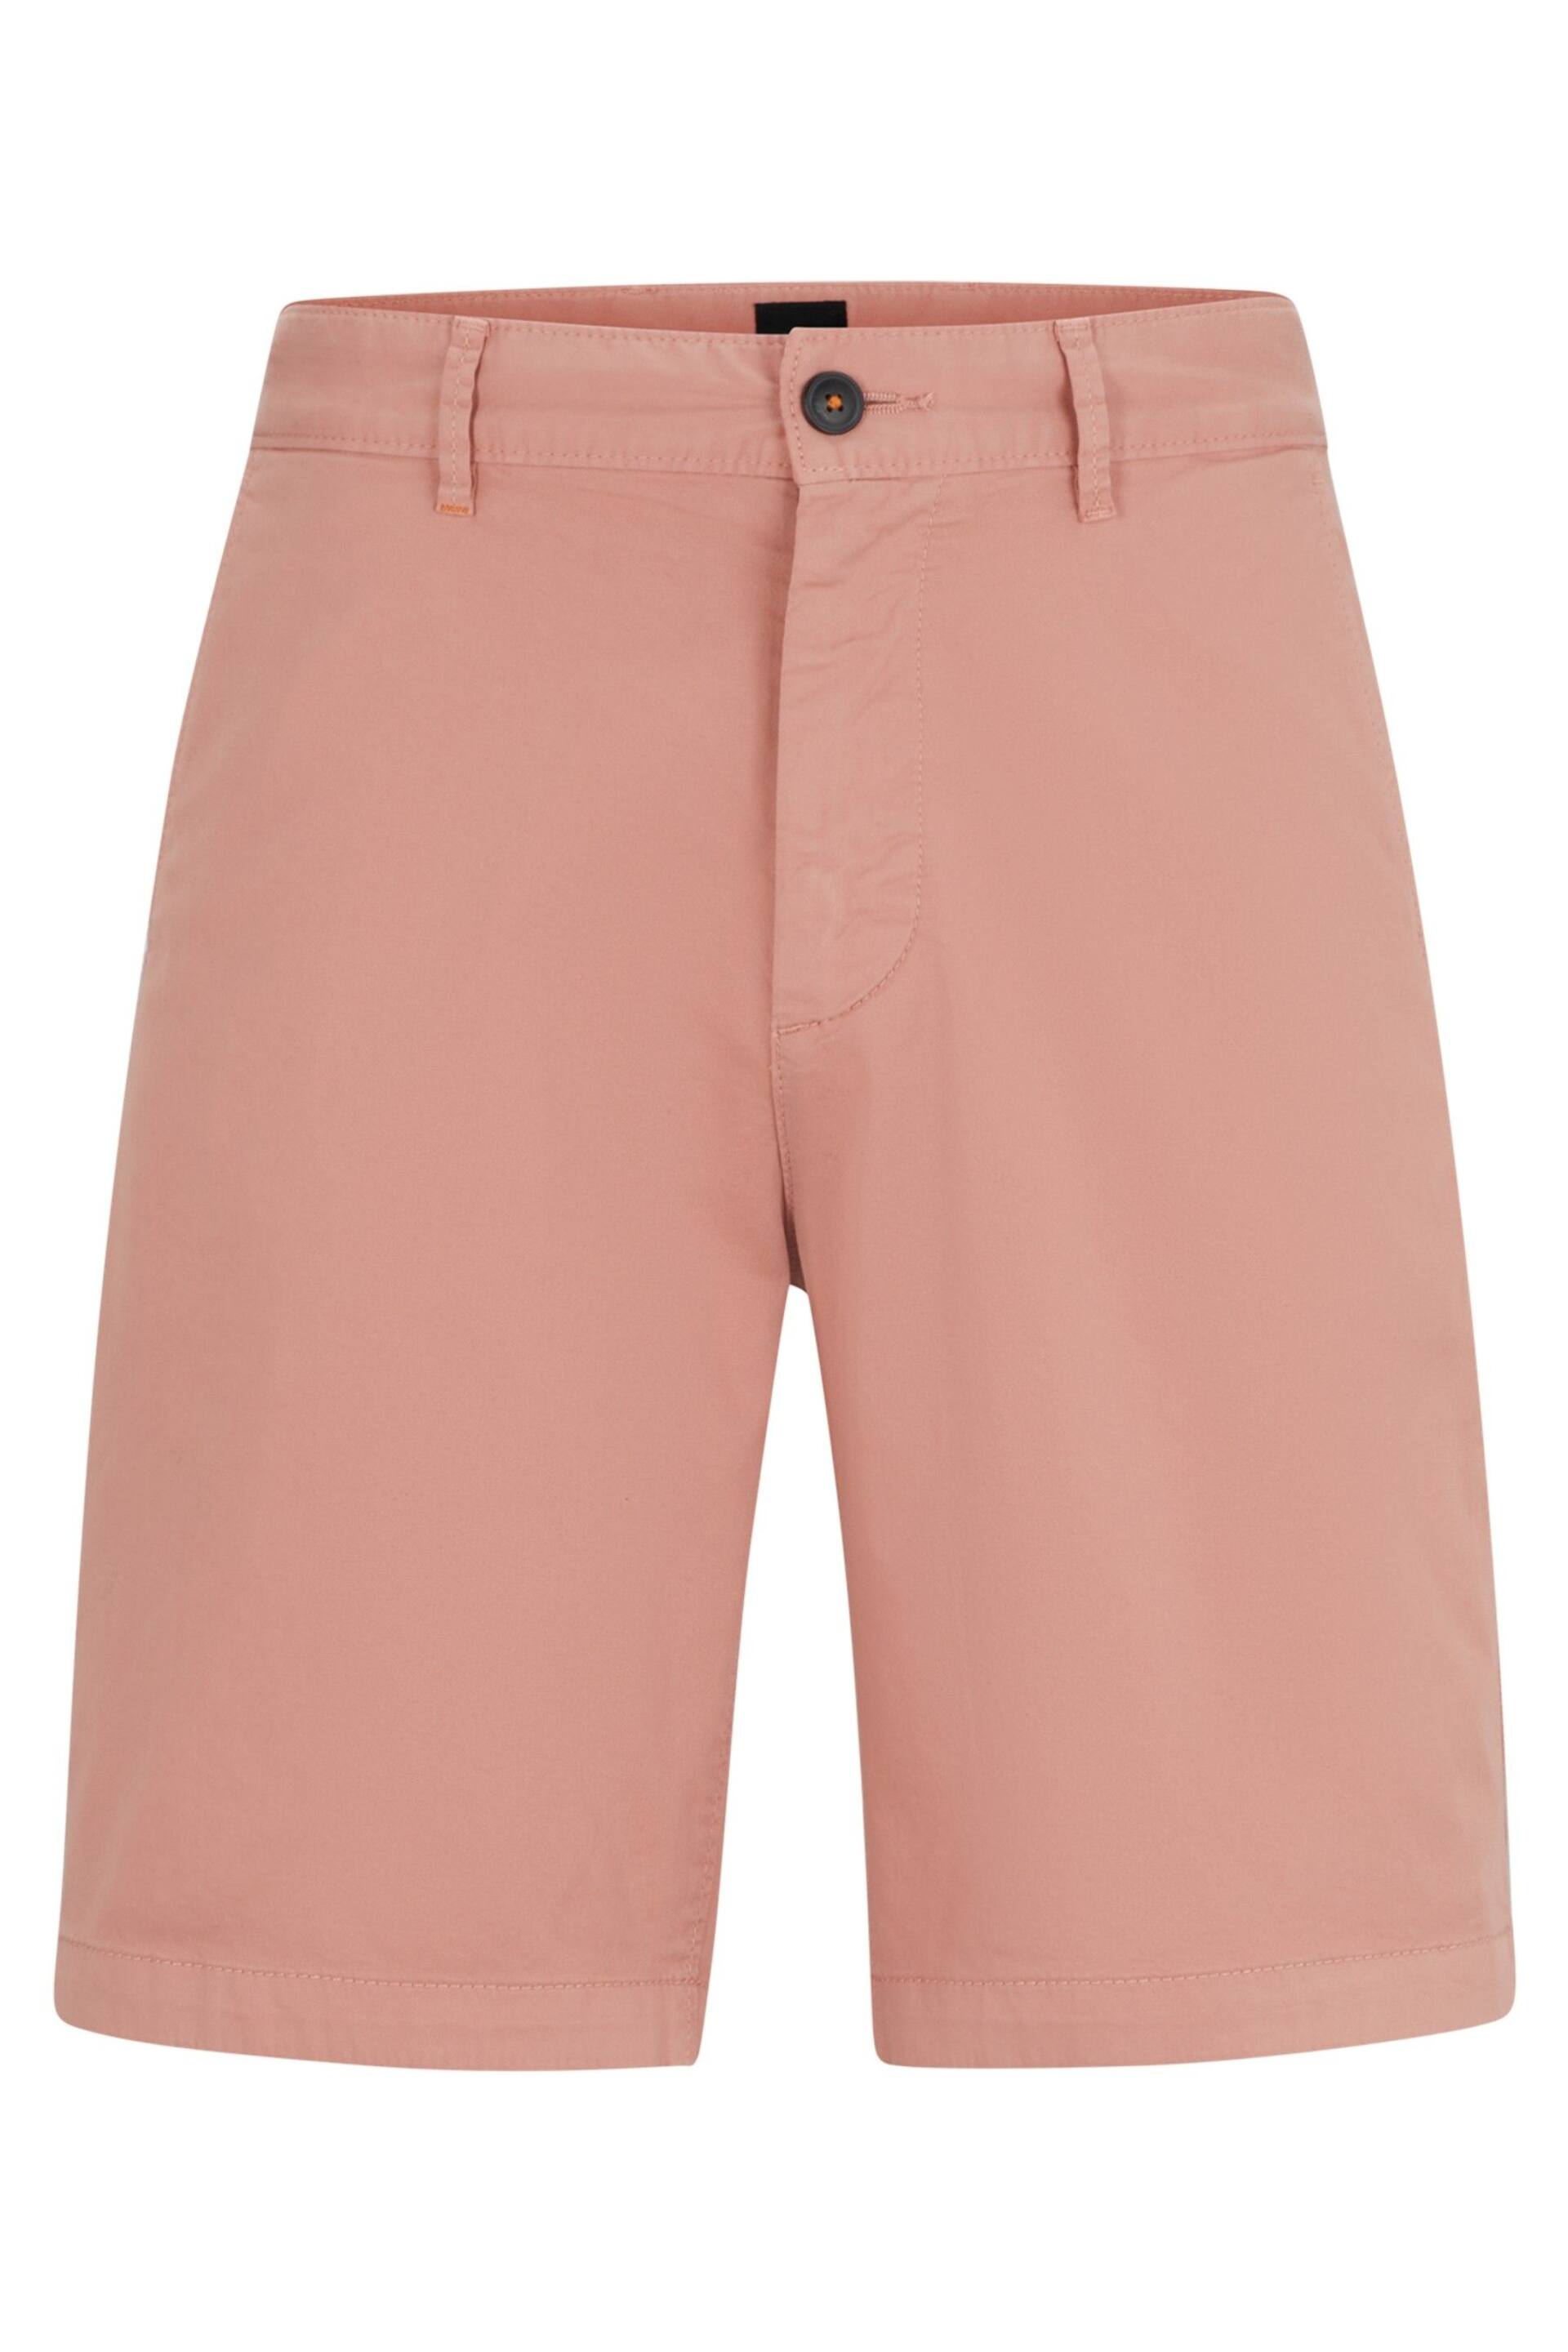 BOSS Pink Slim Fit Stretch Cotton Chino Shorts - Image 5 of 5